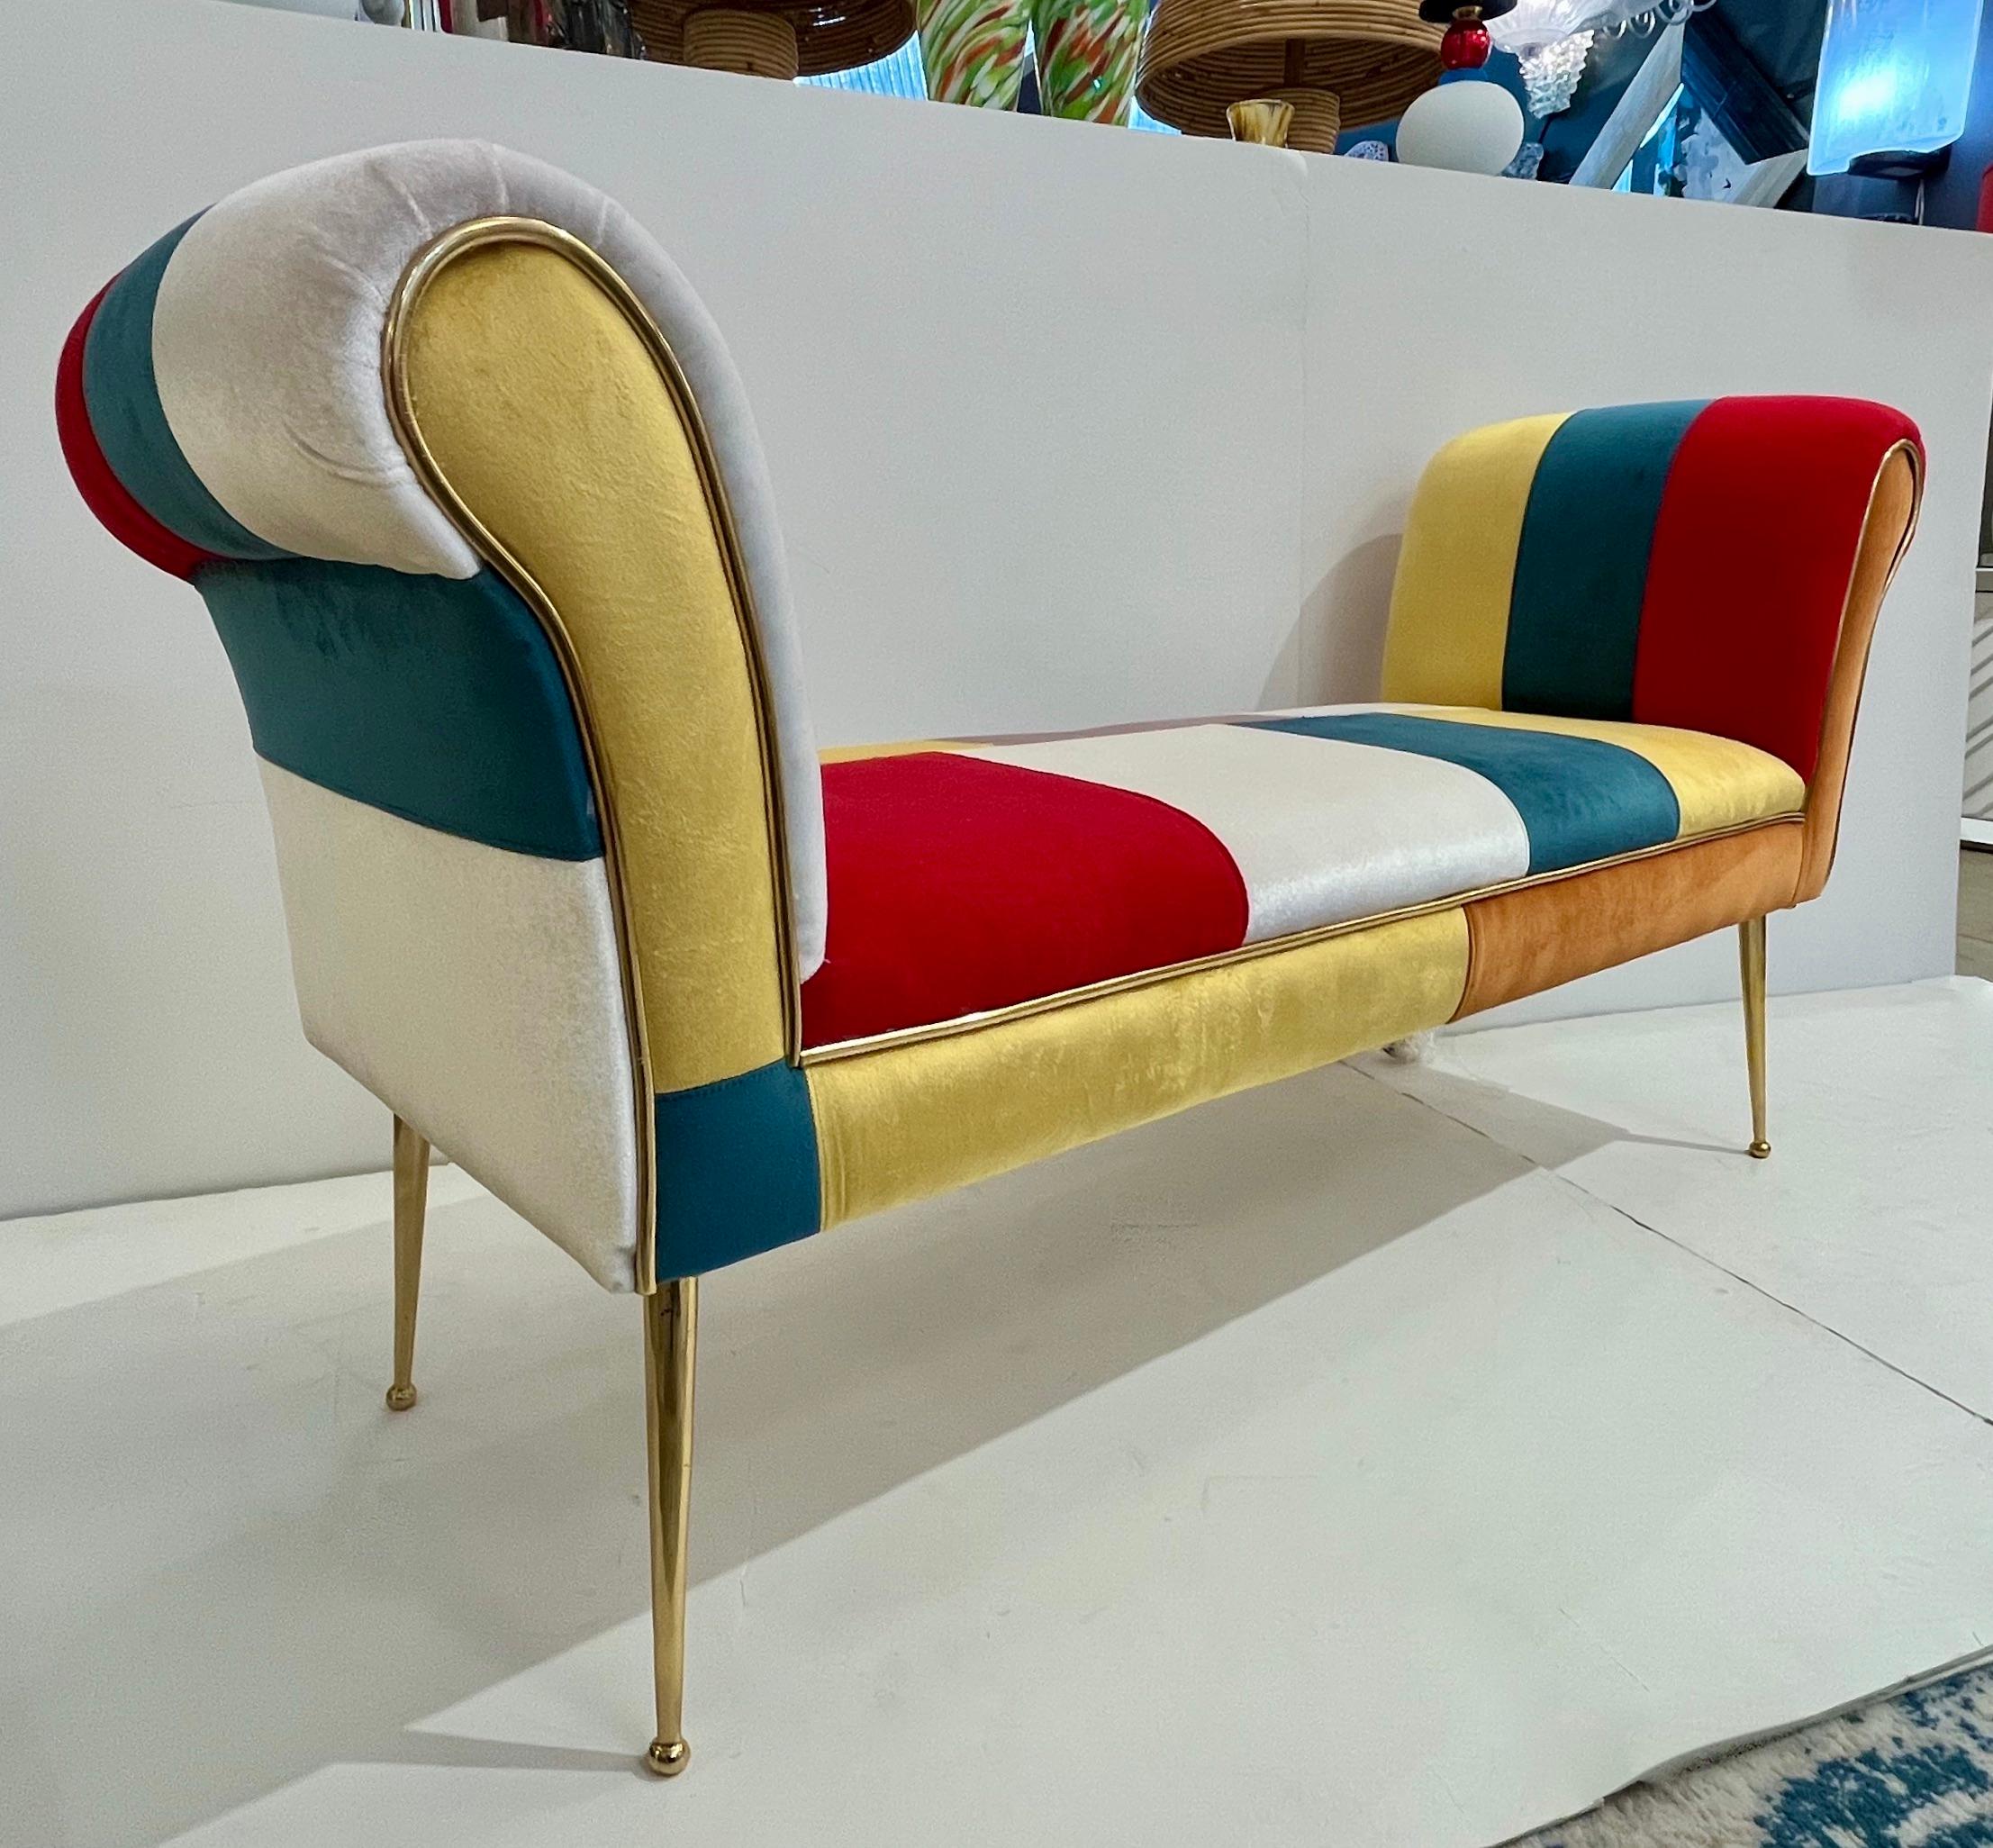 A very fun and colorful addition to any interior, meant to uplift spirits! An Italian multifaceted style modern settee with a thrilling velvet upholstery for the unusual and unique Mondrian inspired decor, in white, yellow, green, red, terracotta